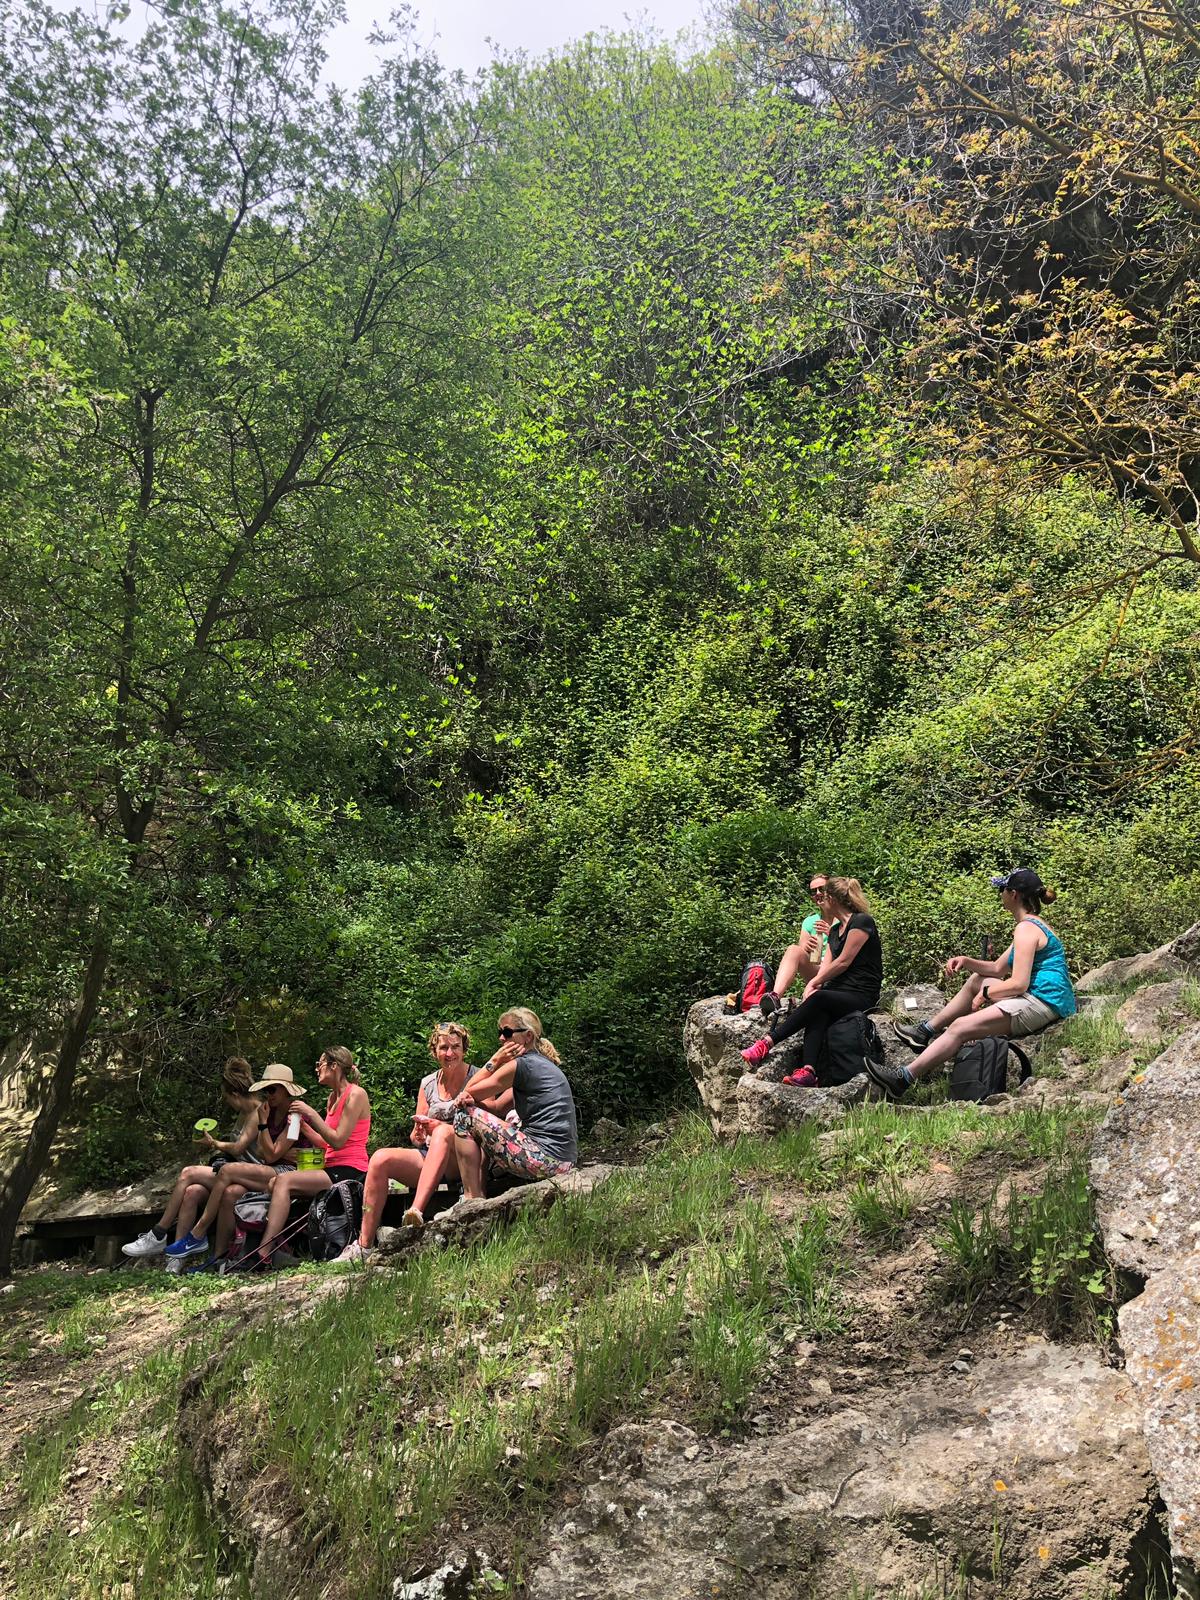 Lunch during hike at Yin Yang Yoga retreat in the Malaga mountains in Spain with Jane Bakx Yoga (Copy) (Copy)